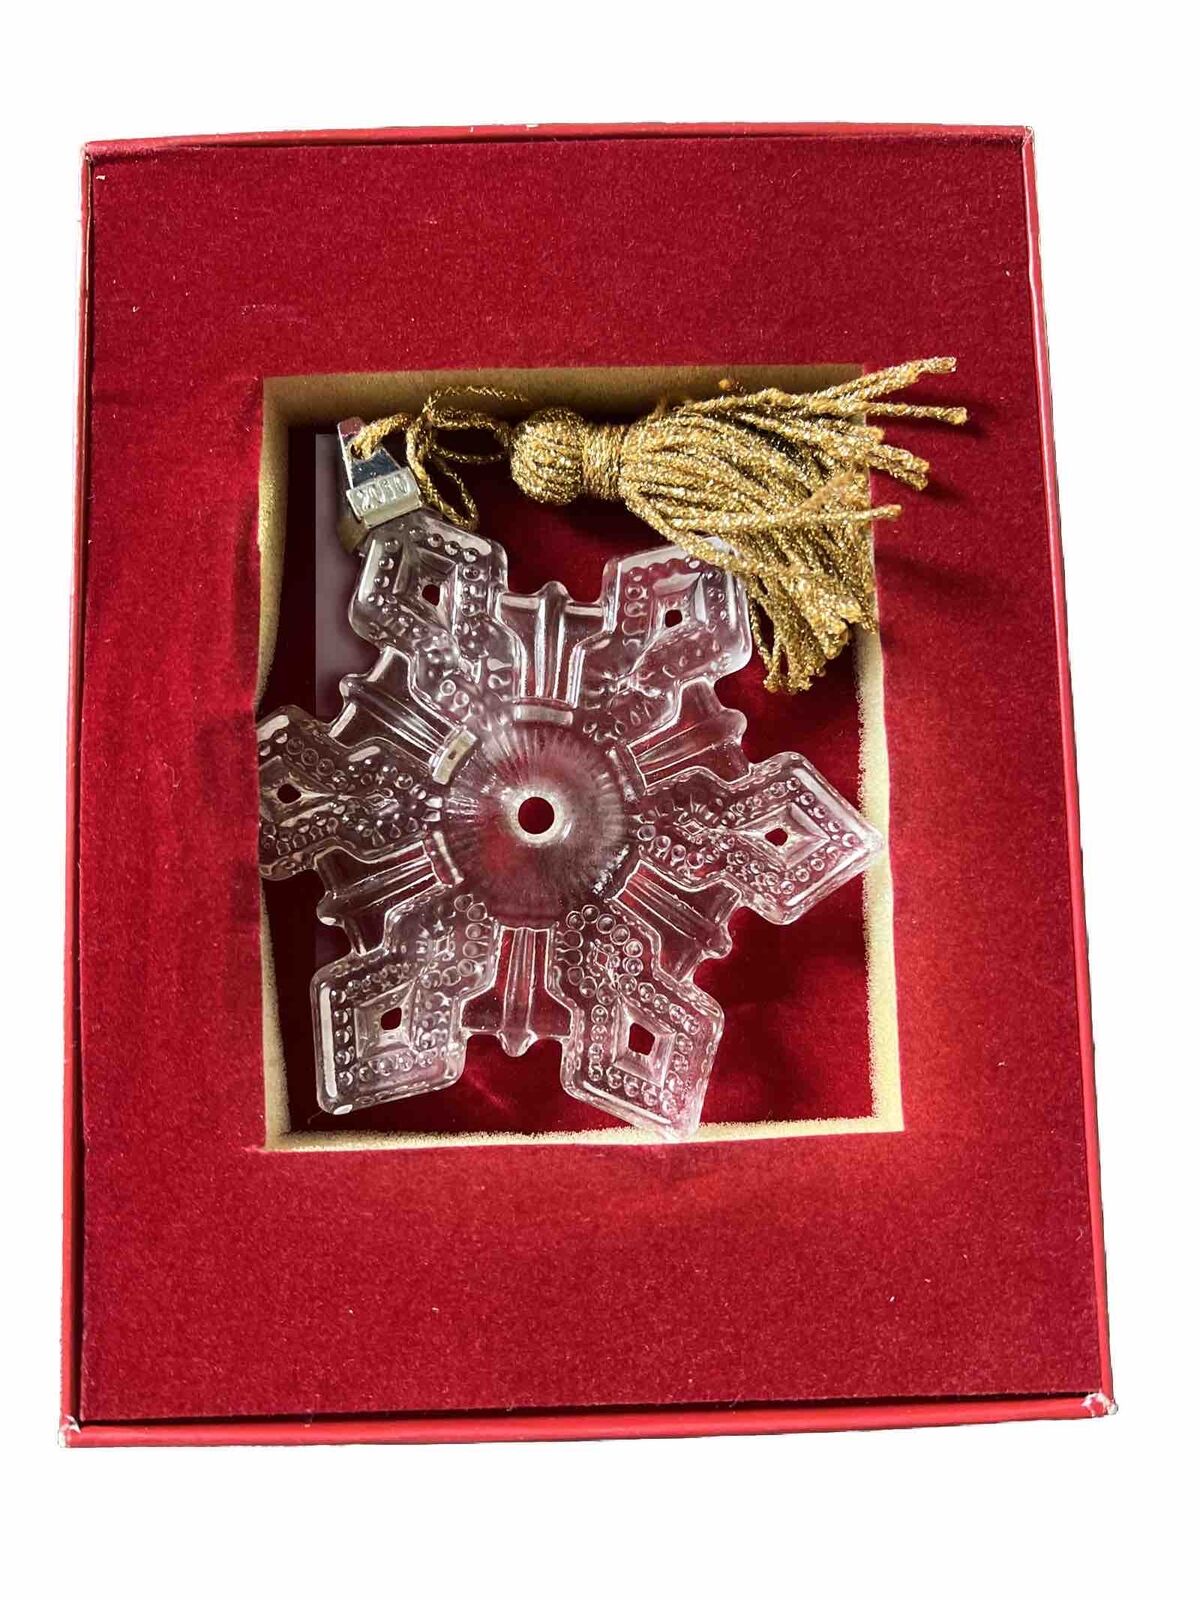 Marquis By Waterford 2010 Snowflake Glass Crystal Christmas Ornament In Box